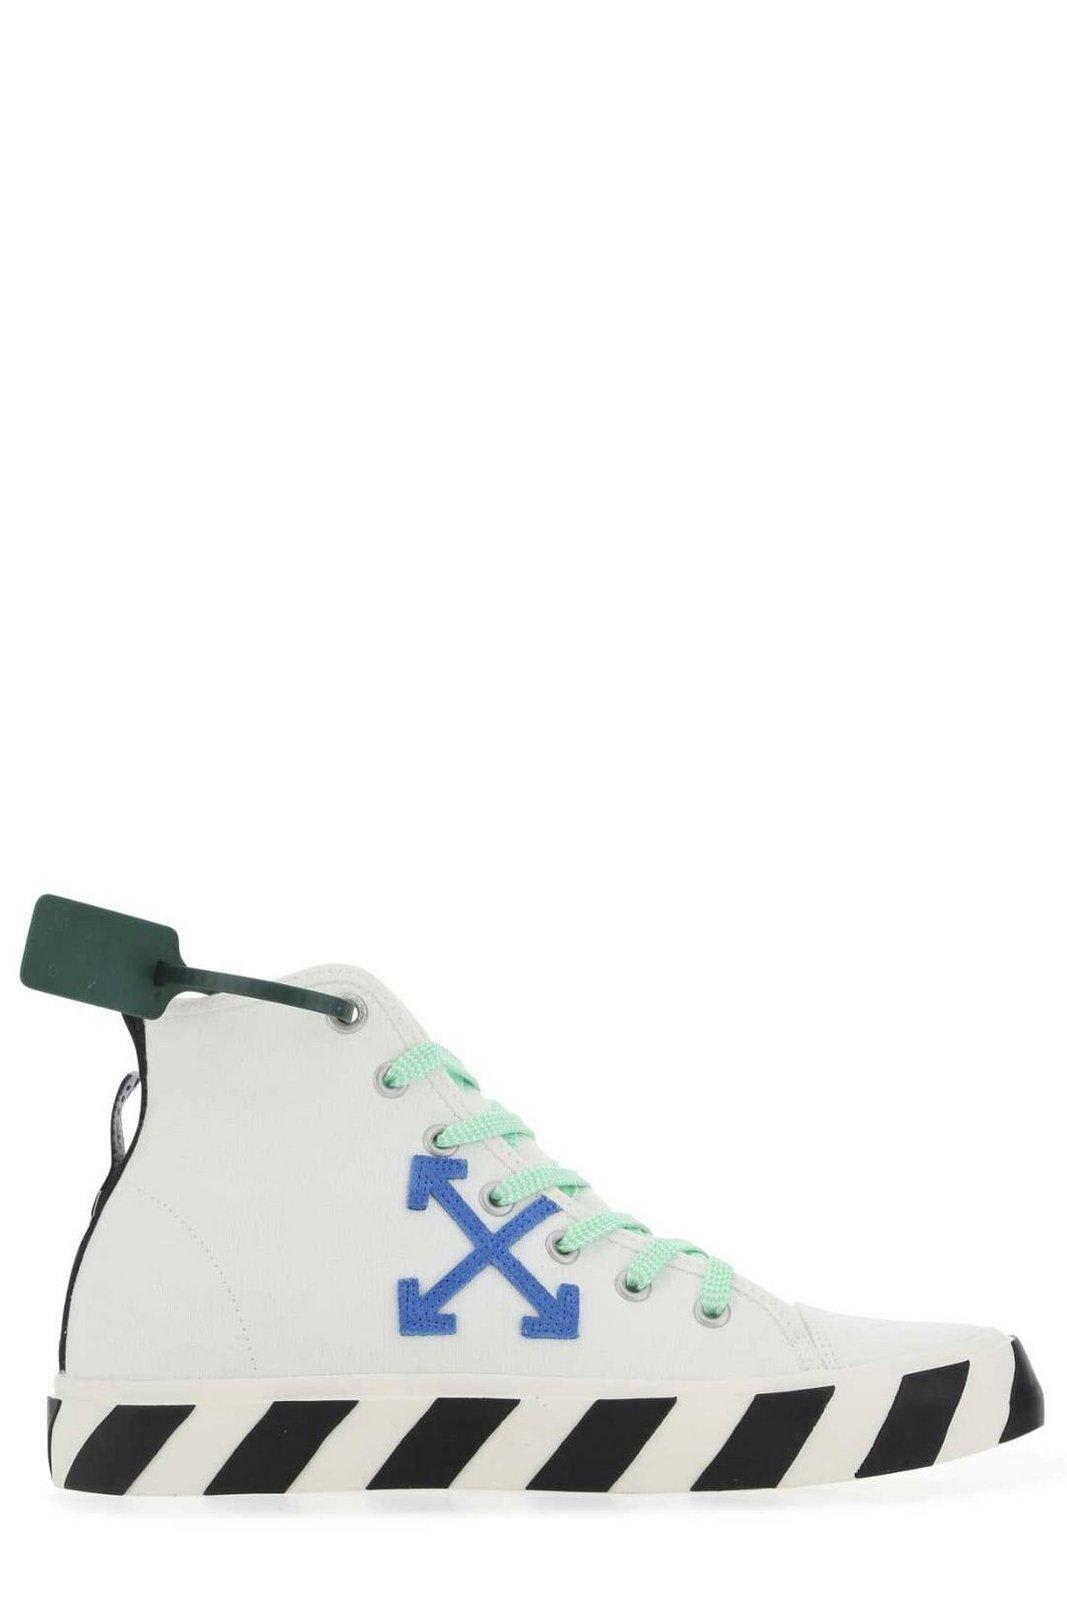 Off-White Arrows Motif High-top Sneakers